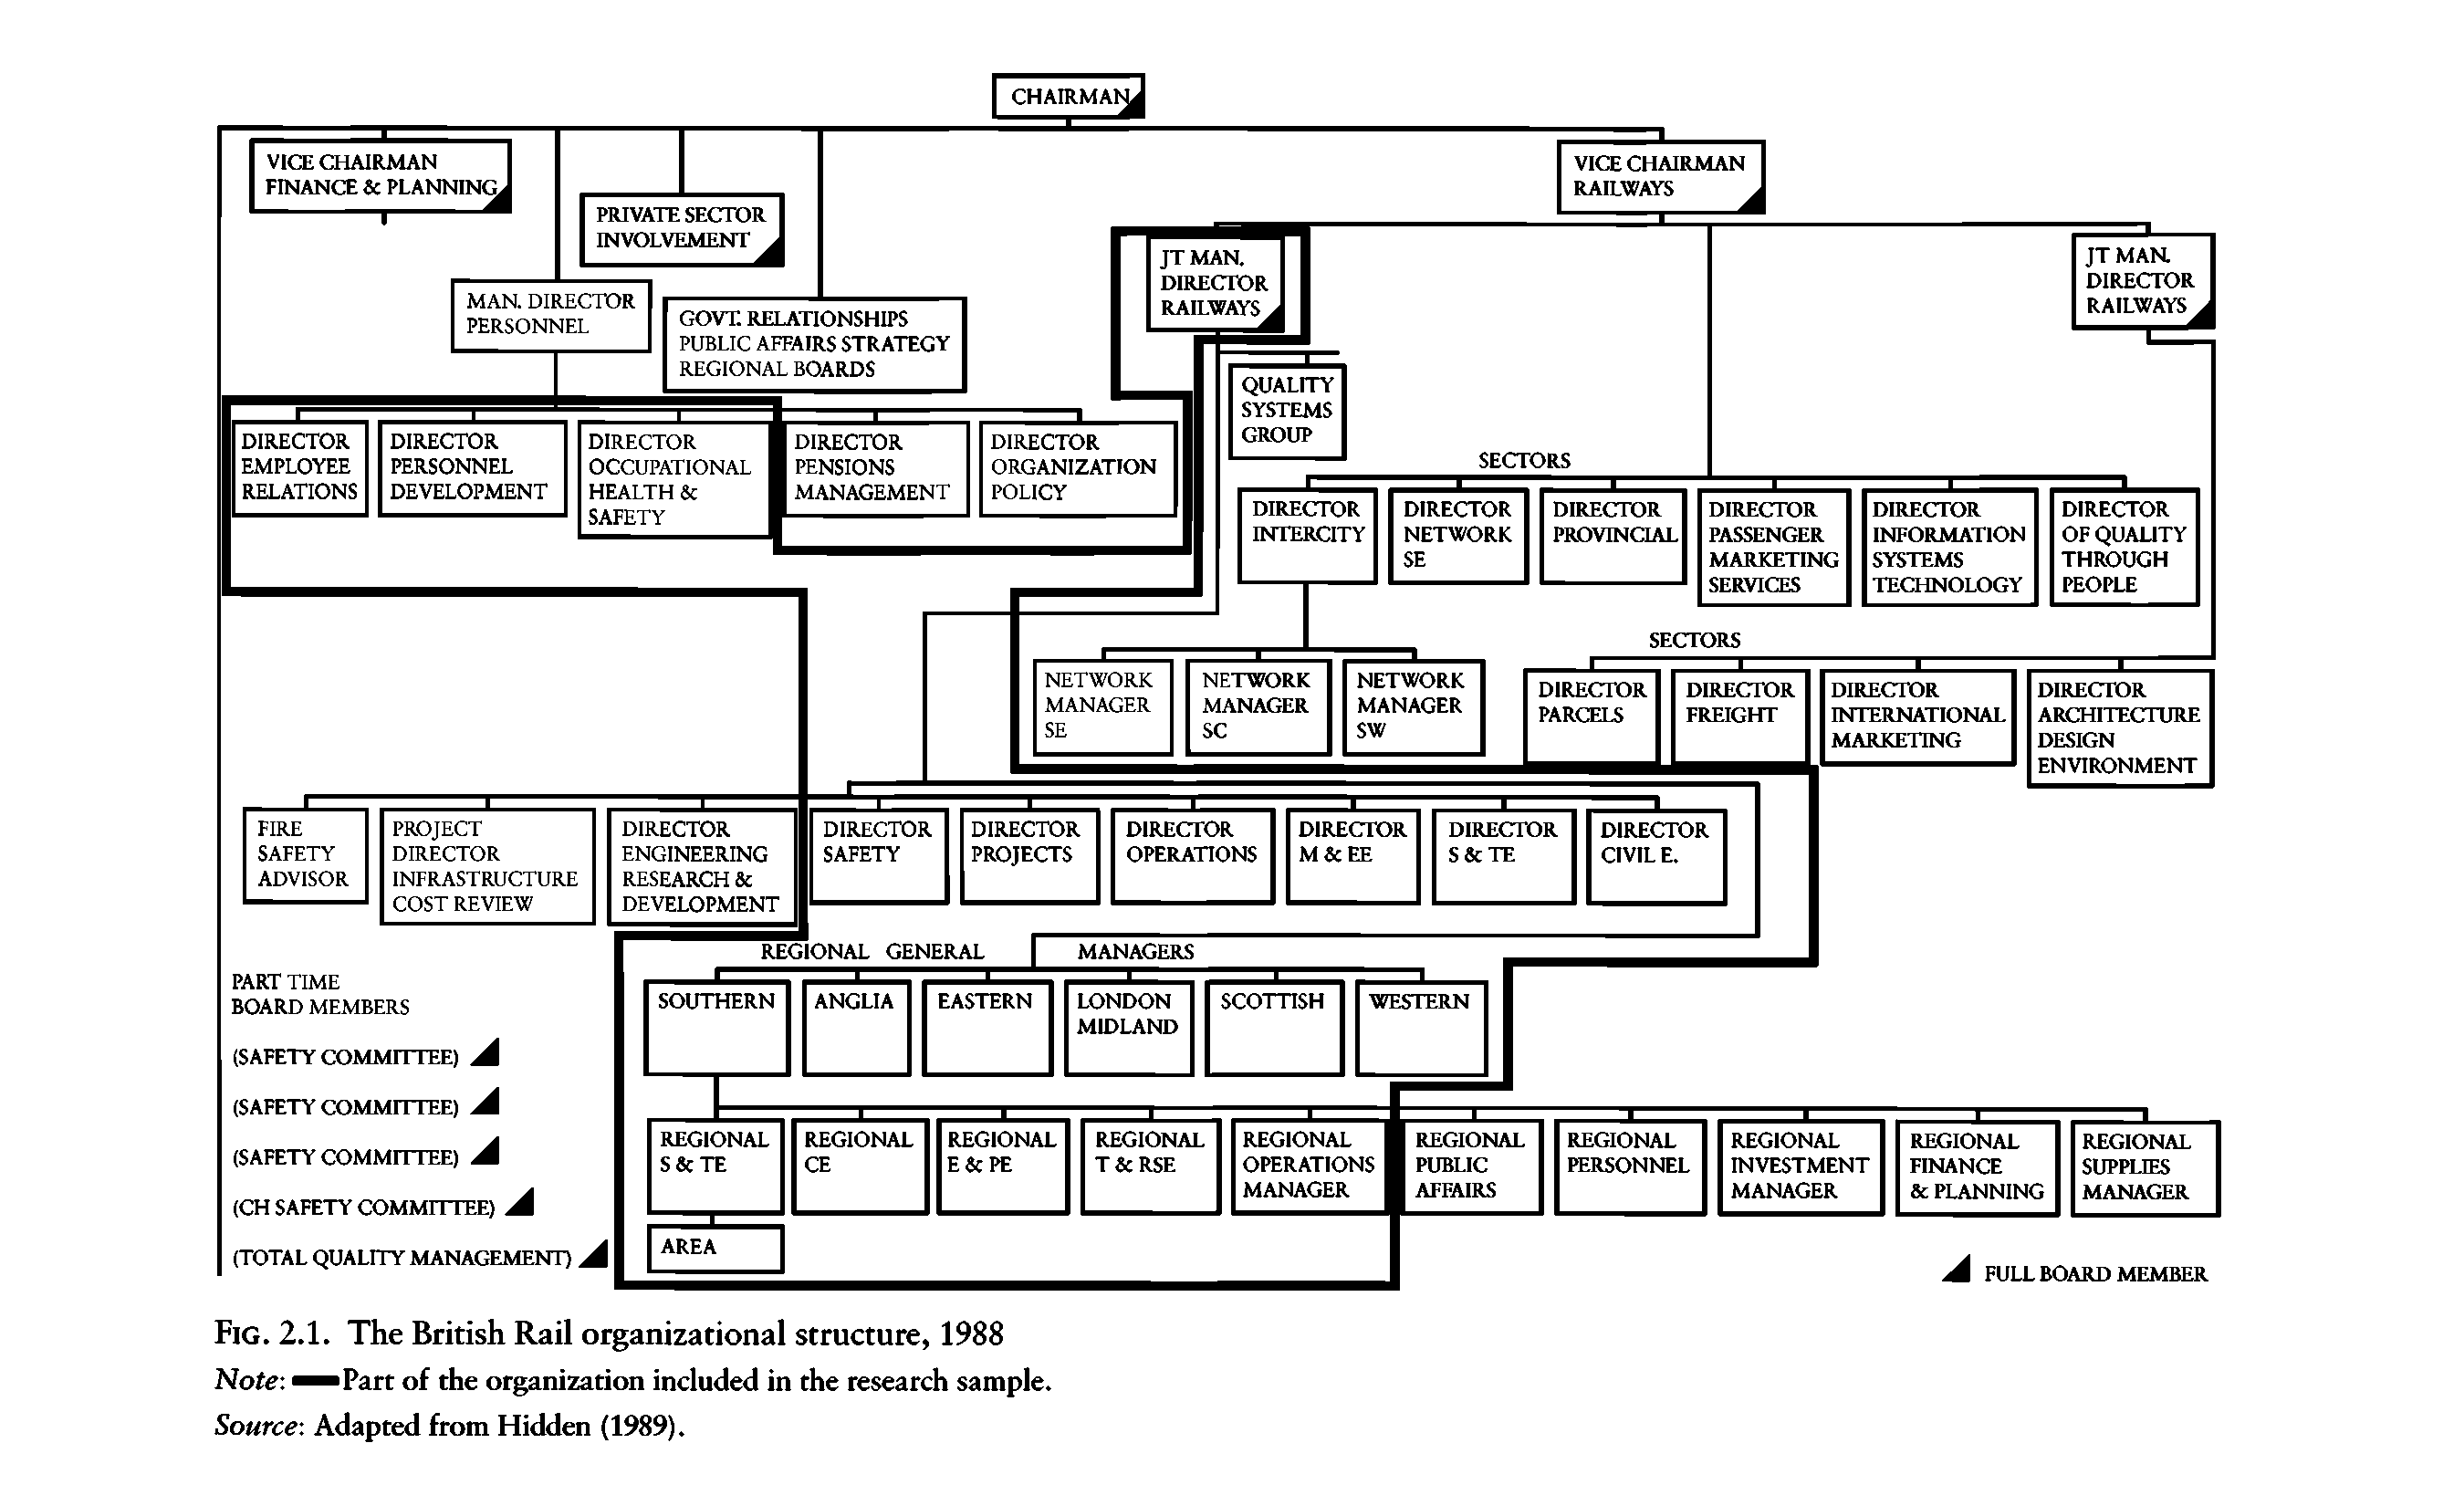 Fig. 2.1. The British Rail organizational structure, 1988 Note "Part of the organization included in the research sample. Source Adapted from Hidden (1989).